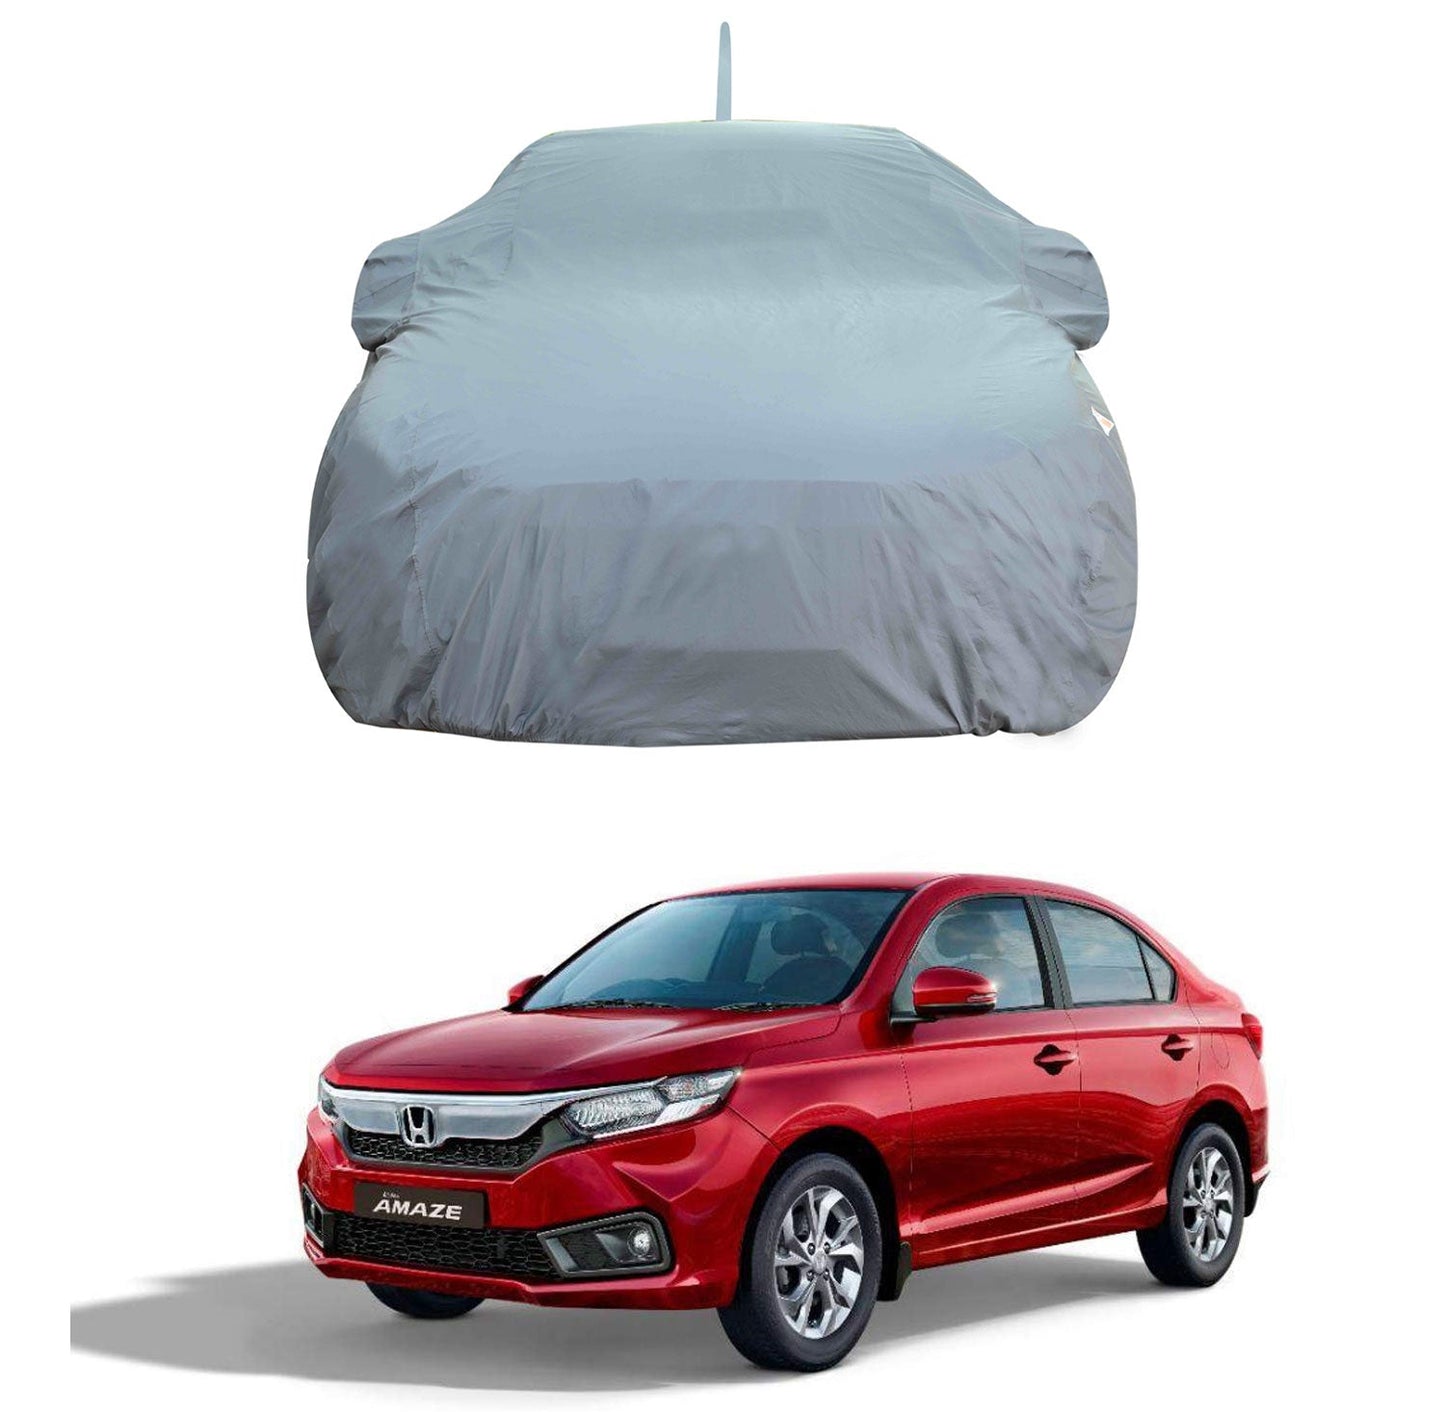 Oshotto Dark Grey 100% Anti Reflective, dustproof and Water Proof Car Body Cover with Mirror Pockets, Antenna For Honda Amaze Old (2013-2017)